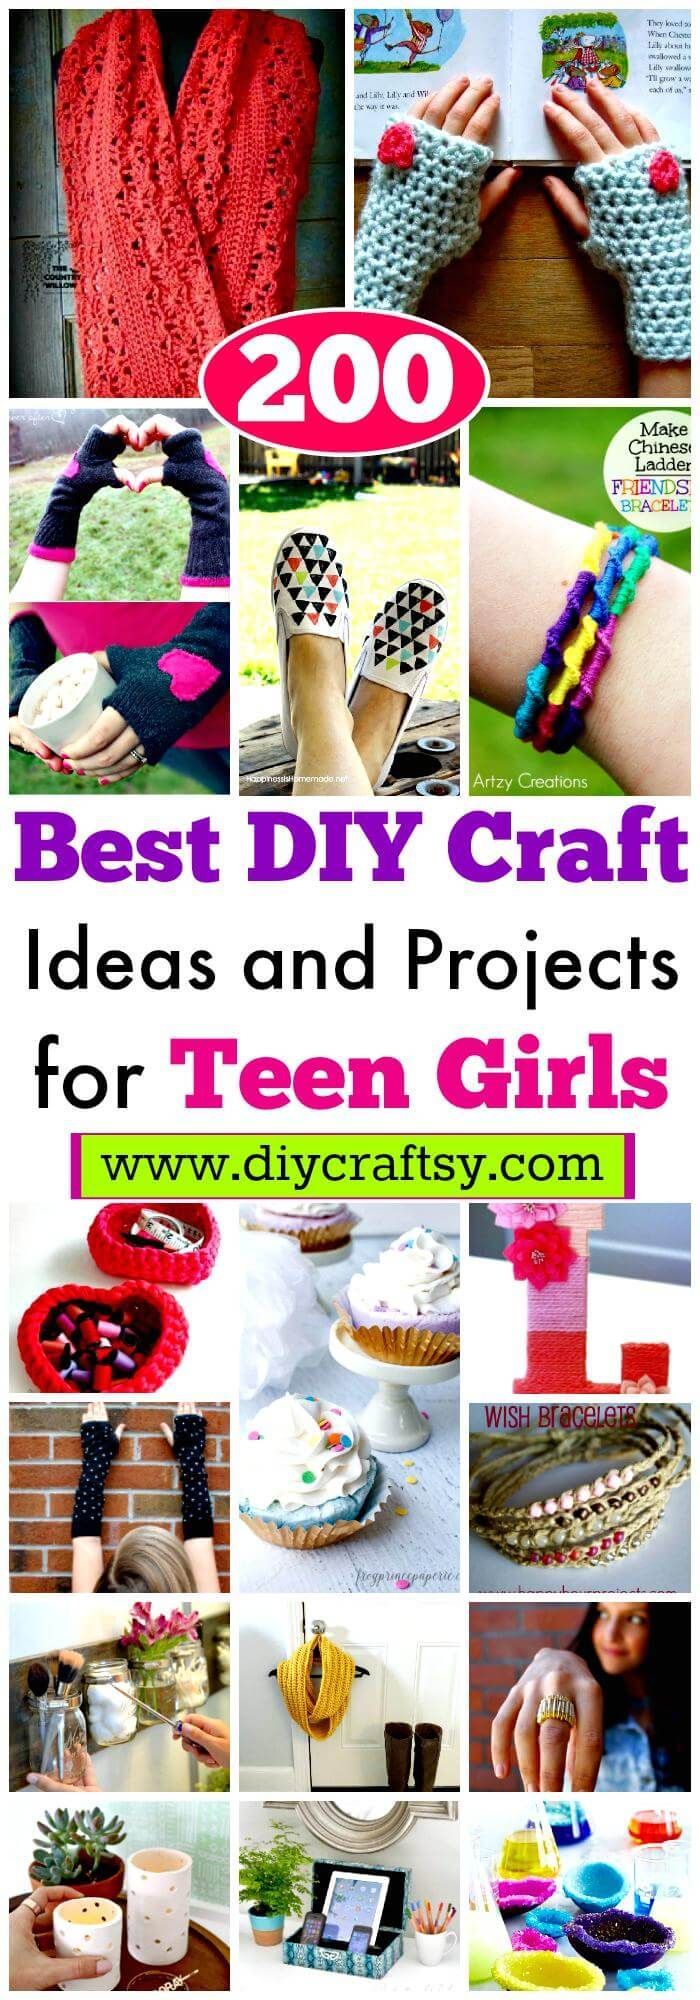 200 Best DIY Craft Ideas and Projects for Teen Girls -   25 crafts for women
 ideas